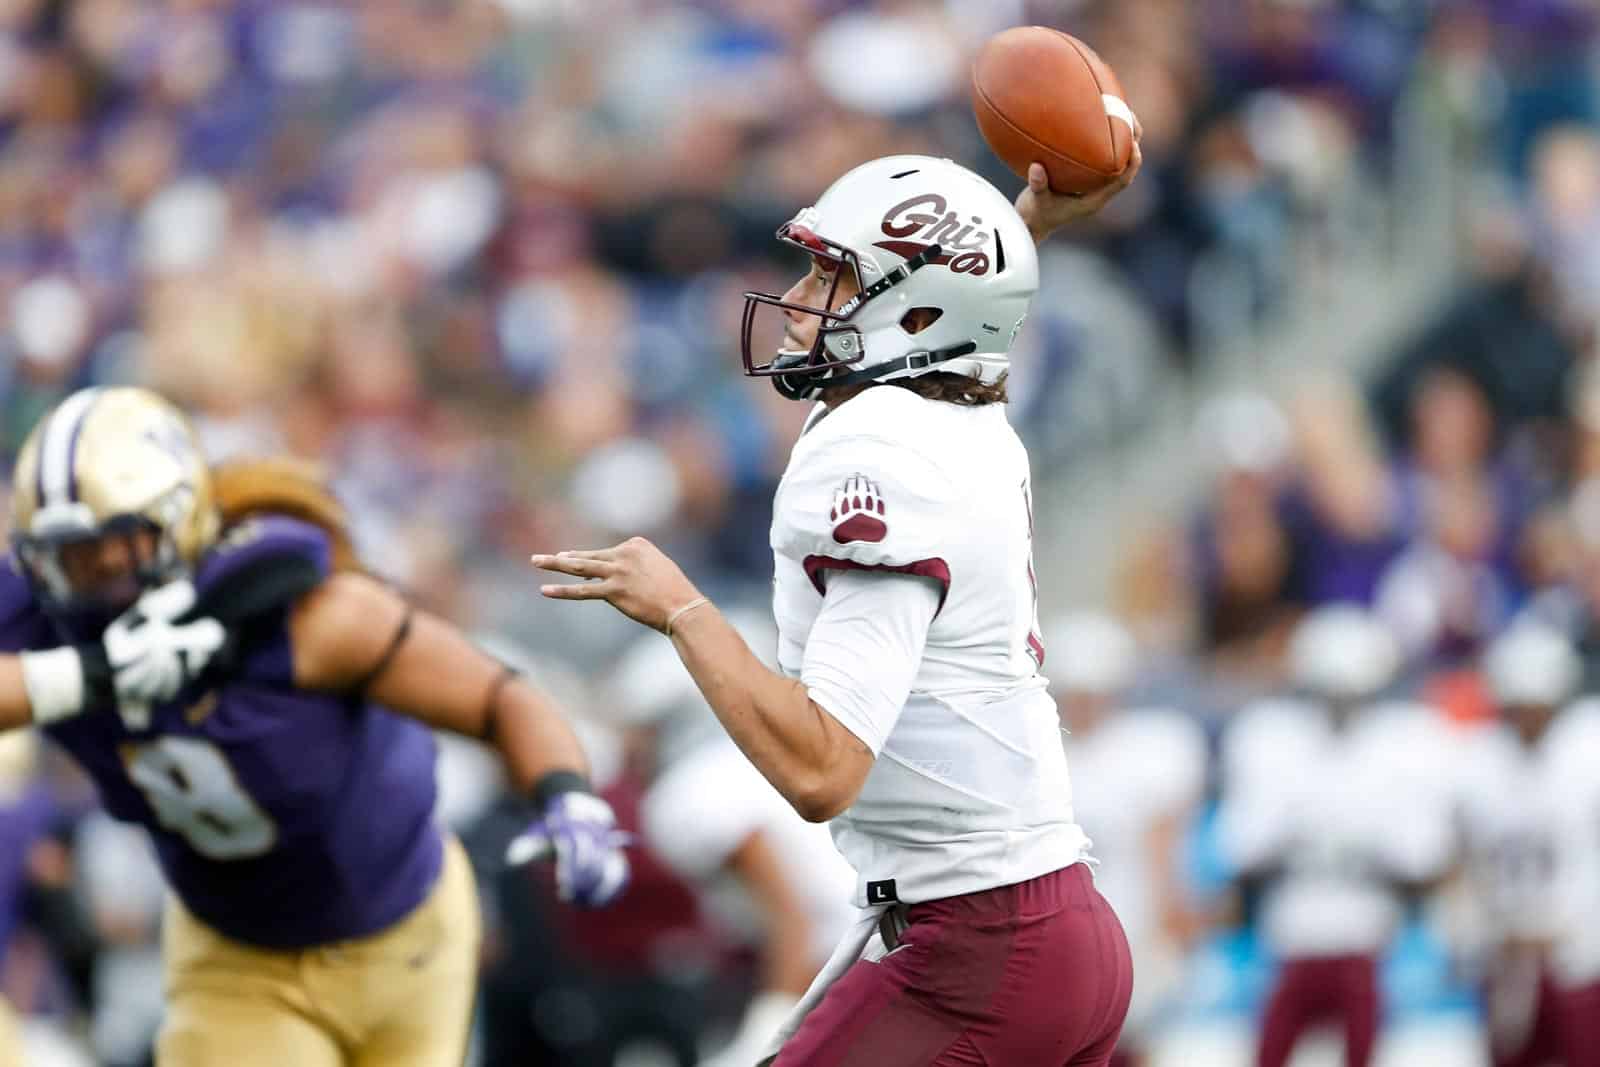 Montana Grizzlies Football Schedule 2022 Montana Adds Northwestern State, Completes 2022 Football Schedule